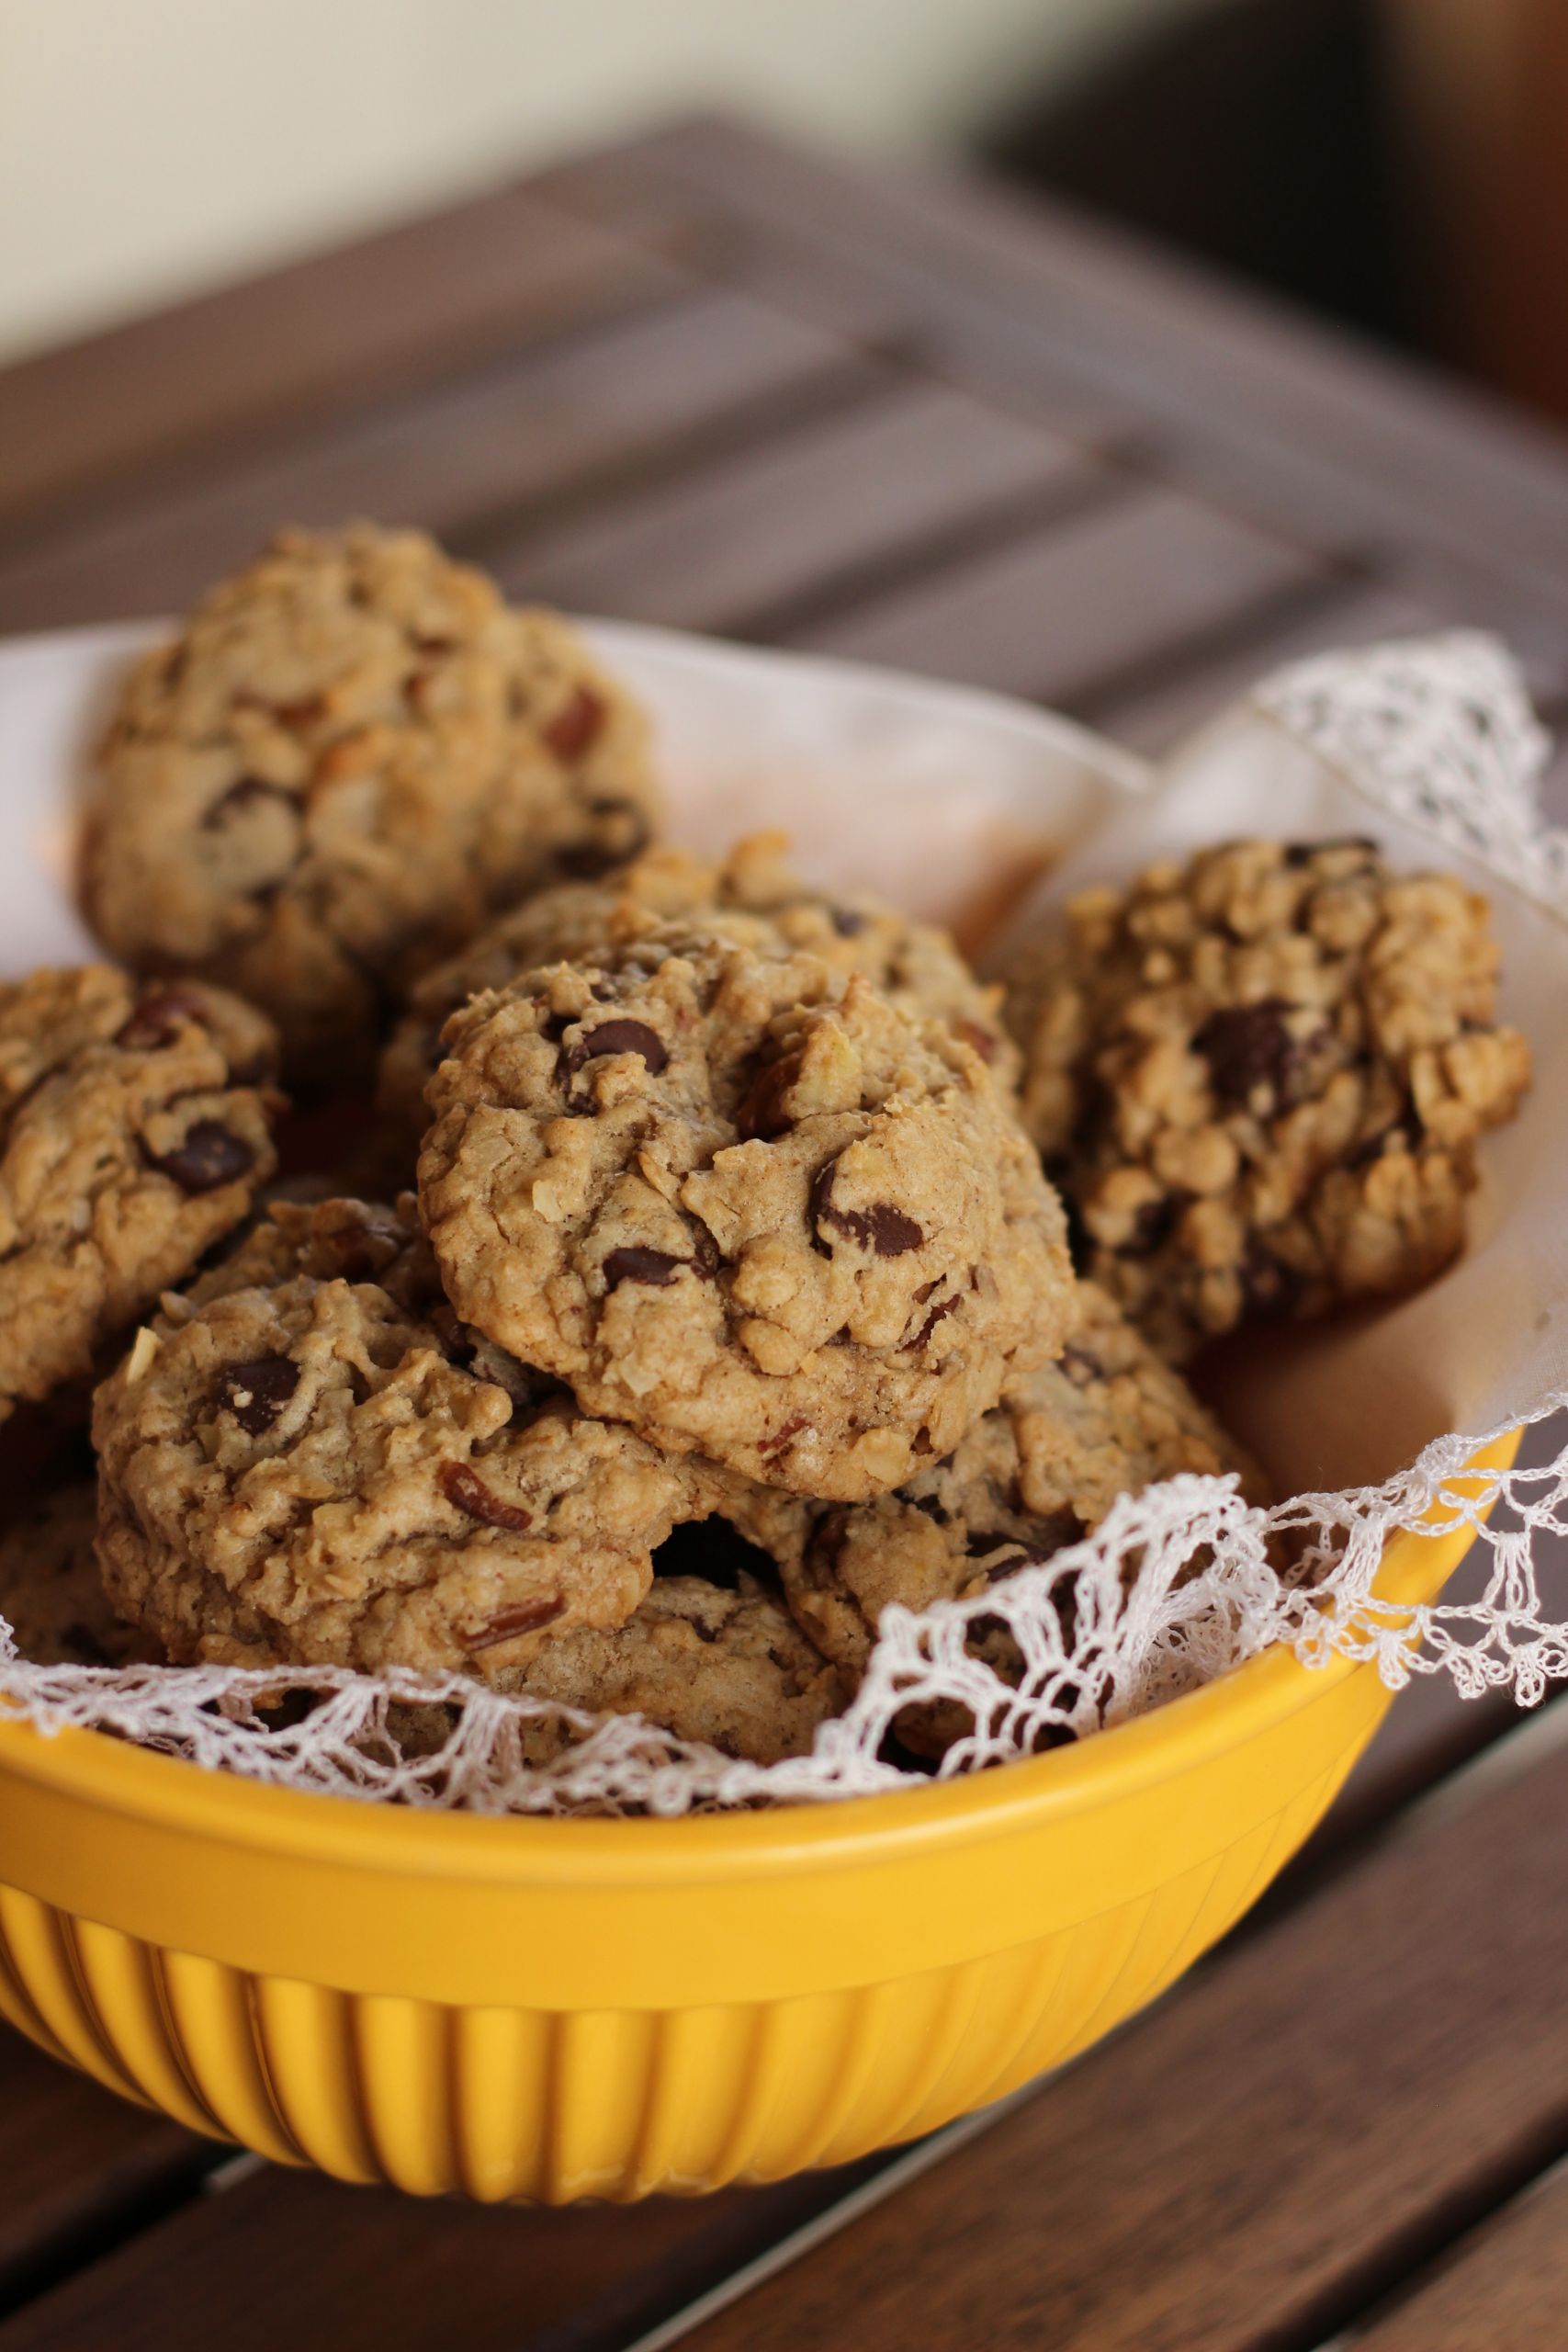 Chocolate Coconut Oatmeal Cookies Awesome Coconut Oatmeal Chocolate Chip Cookies Your Cup Of Cake